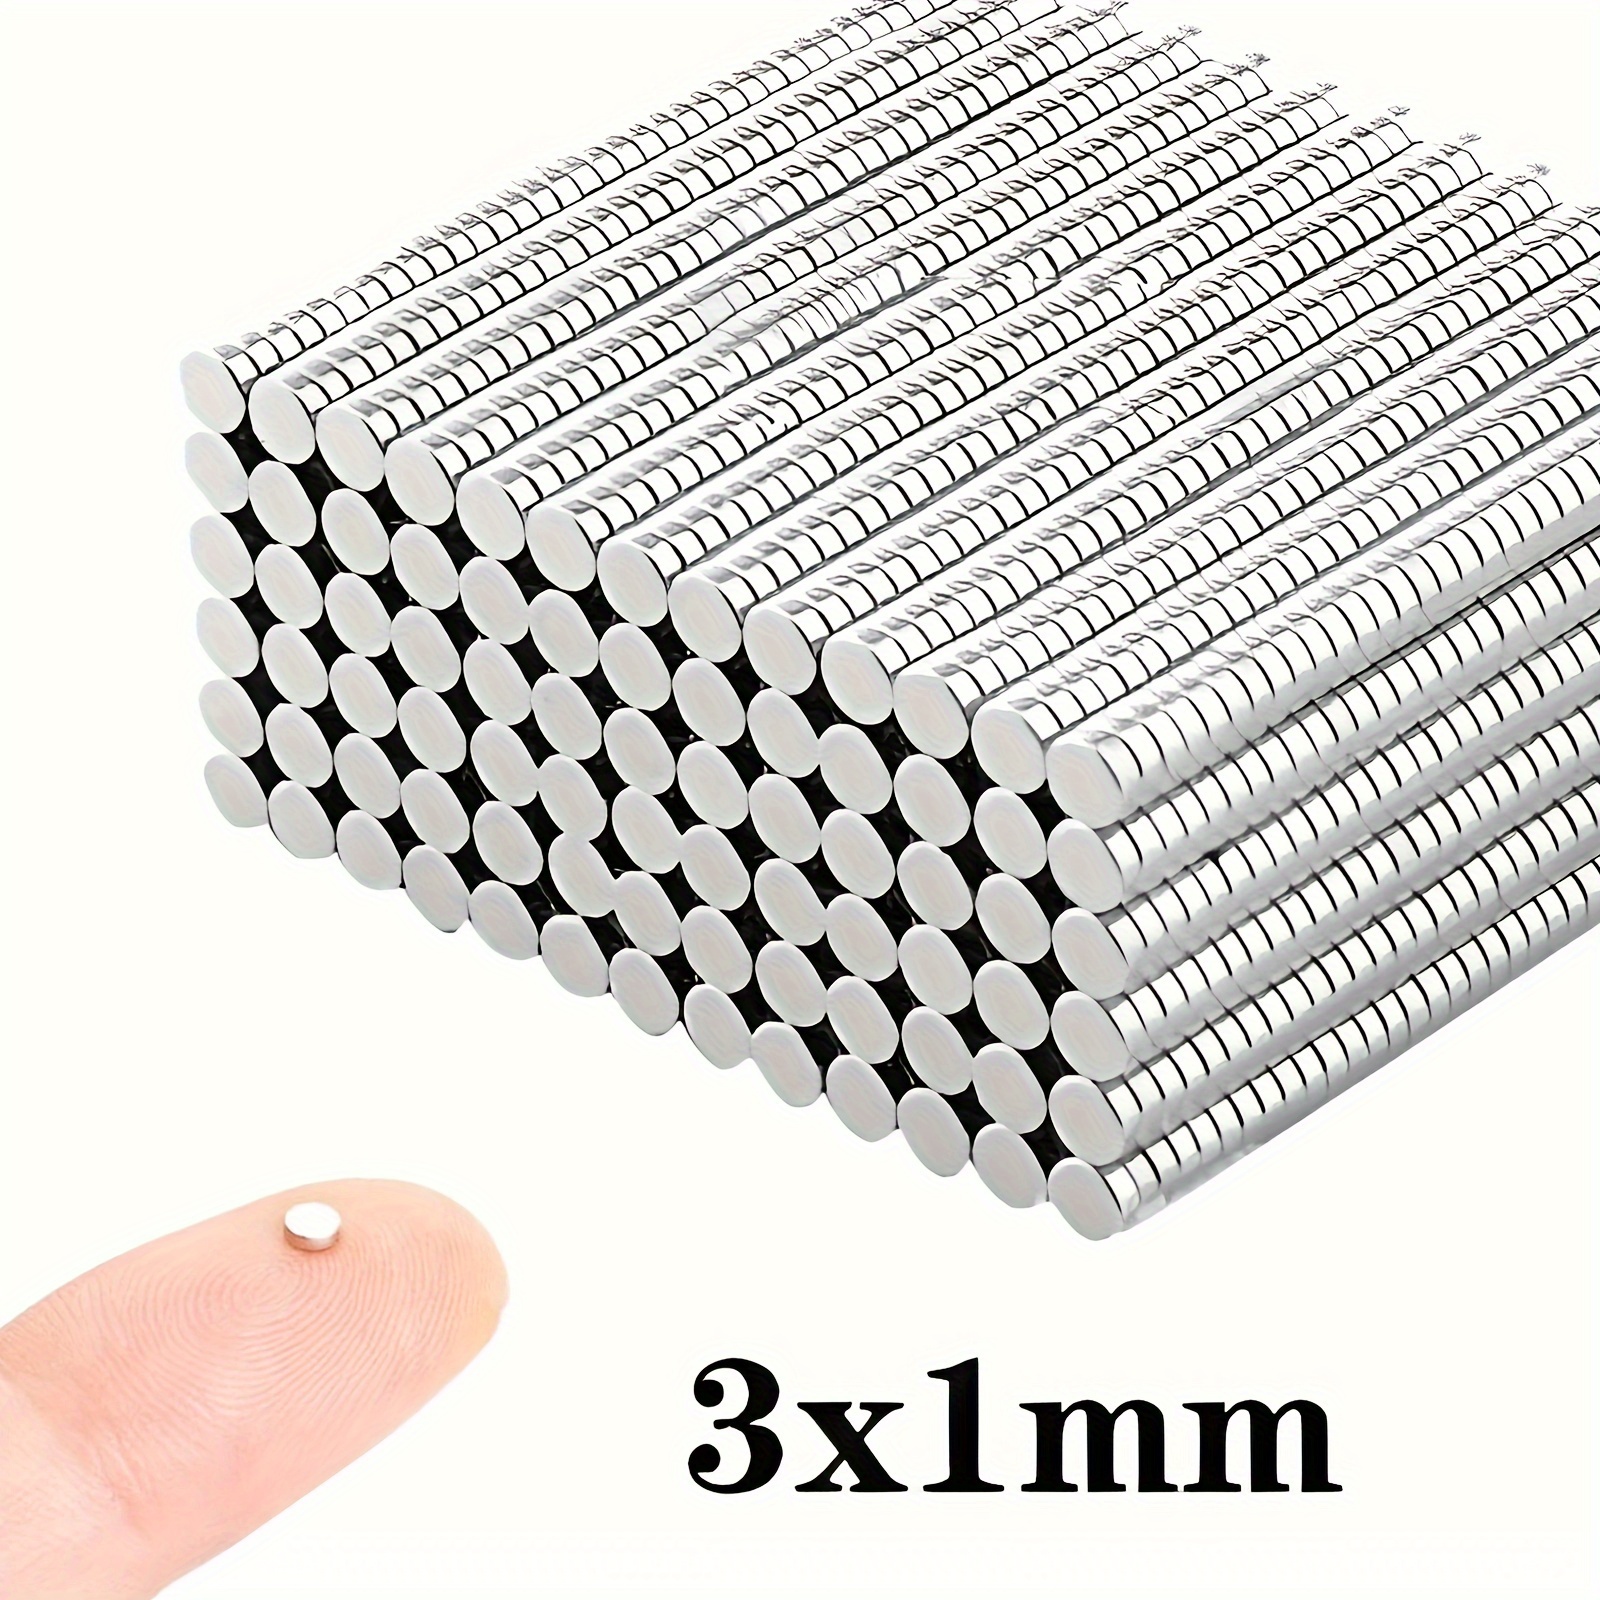 

100pcs Strong Neodymium Iron Magnets, 3x1mm Mini Round Permanent Ndfeb Powerful Magnets For Pins & Tacks